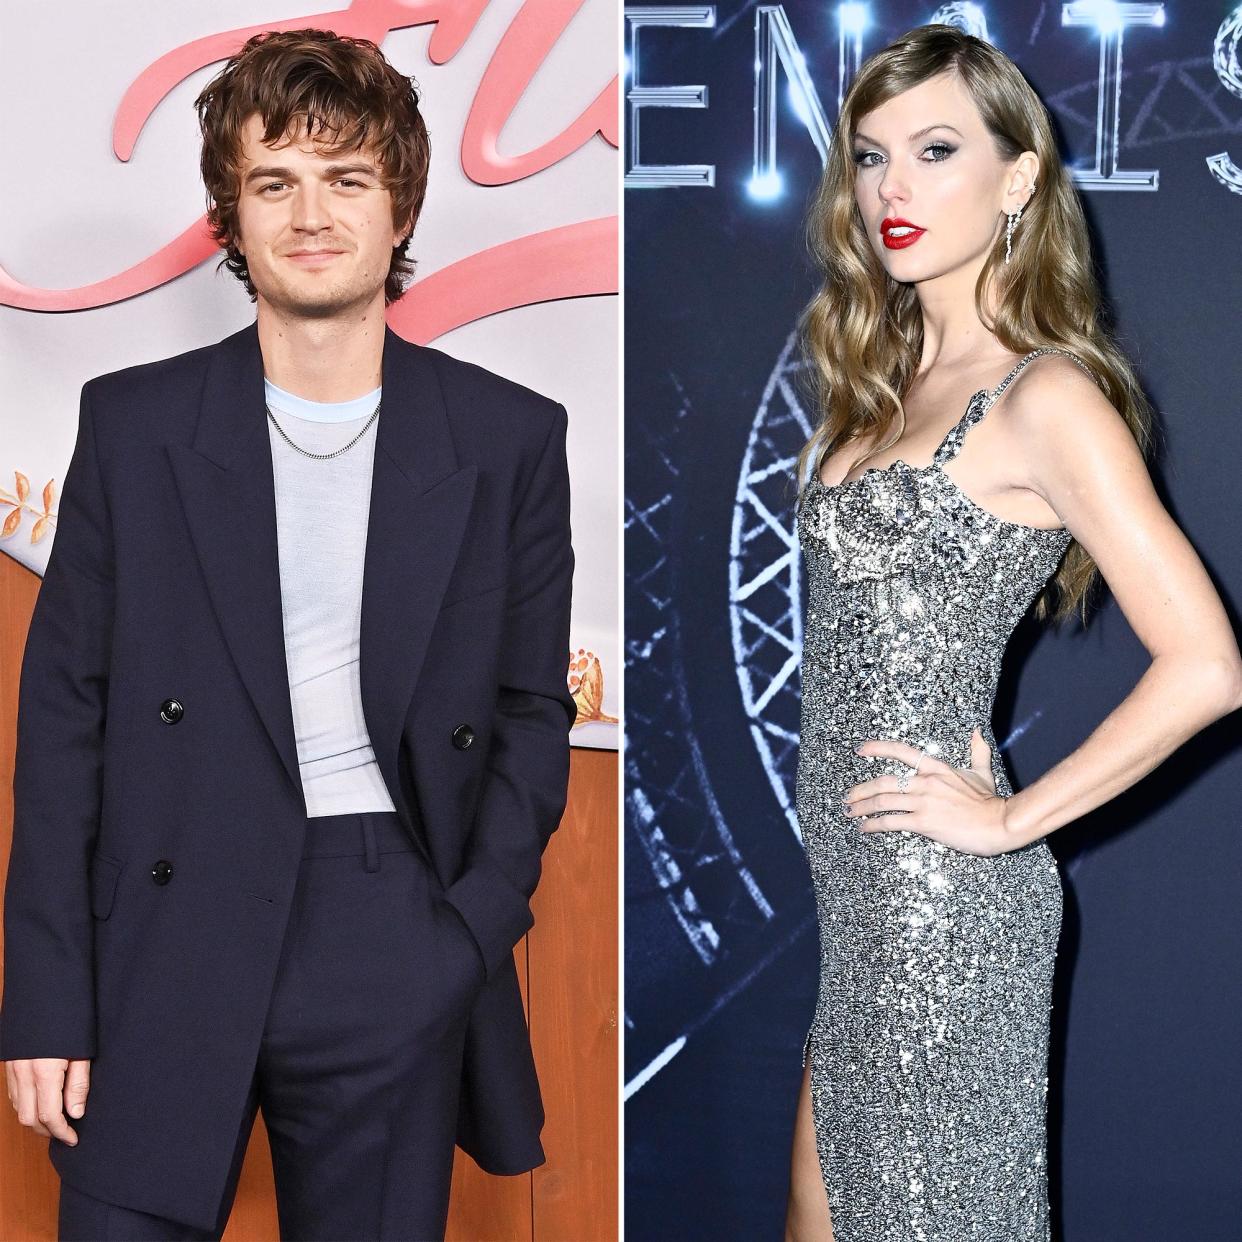 Joe Keery Addresses Fan Rumors About Taylor Swift Collaboration After They Visited Same Music Studio